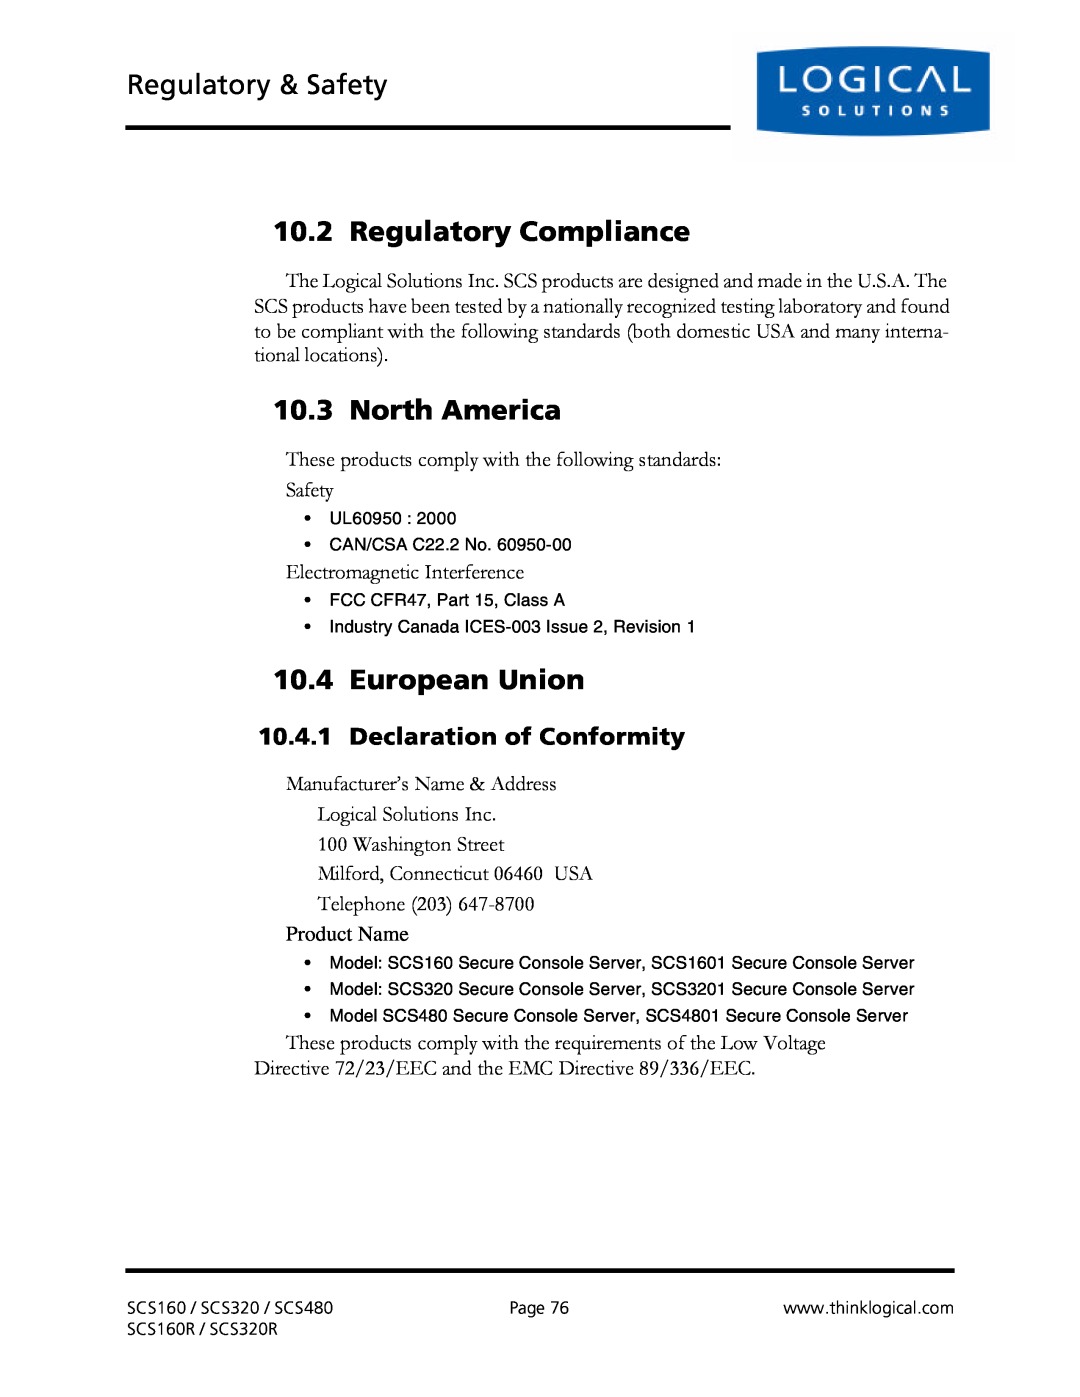 Logical Solutions SCS-R manual Regulatory & Safety, Regulatory Compliance, North America, European Union 